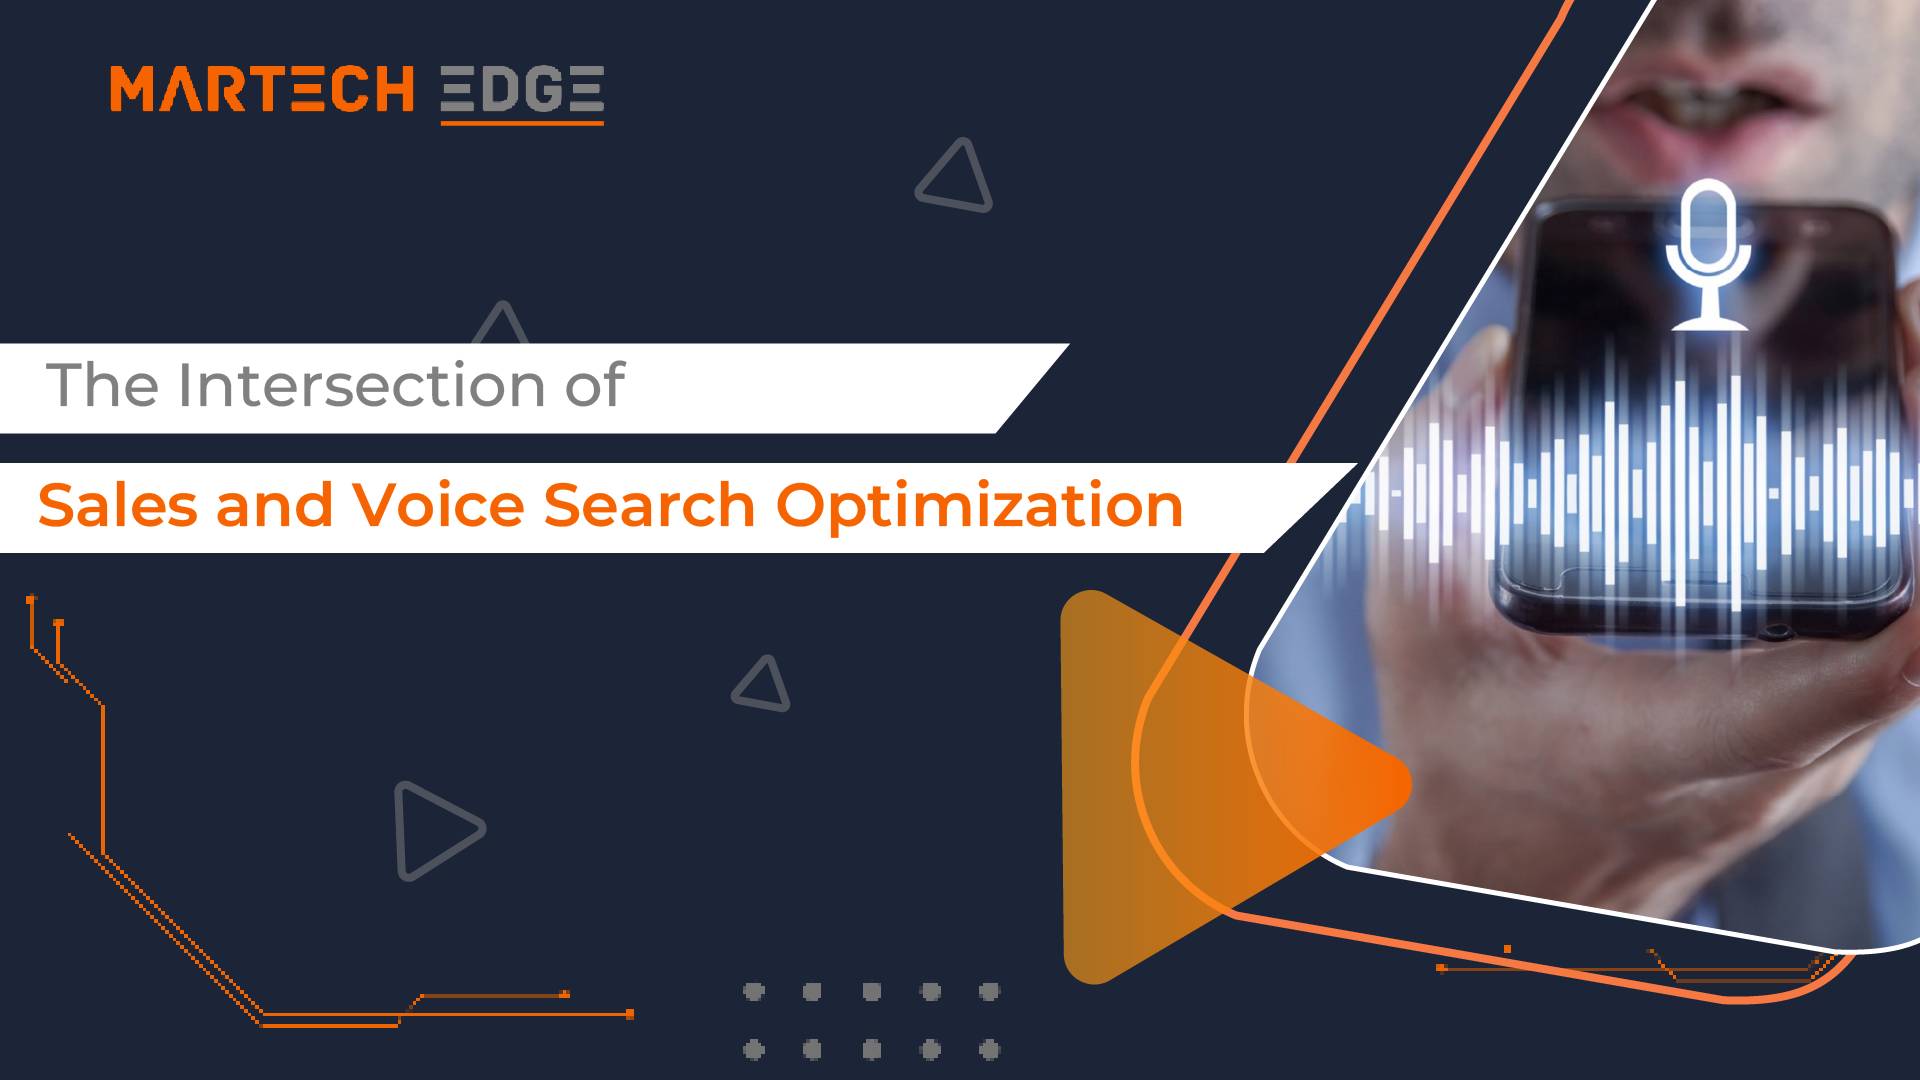 The Intersection of Sales and Voice Search Optimization